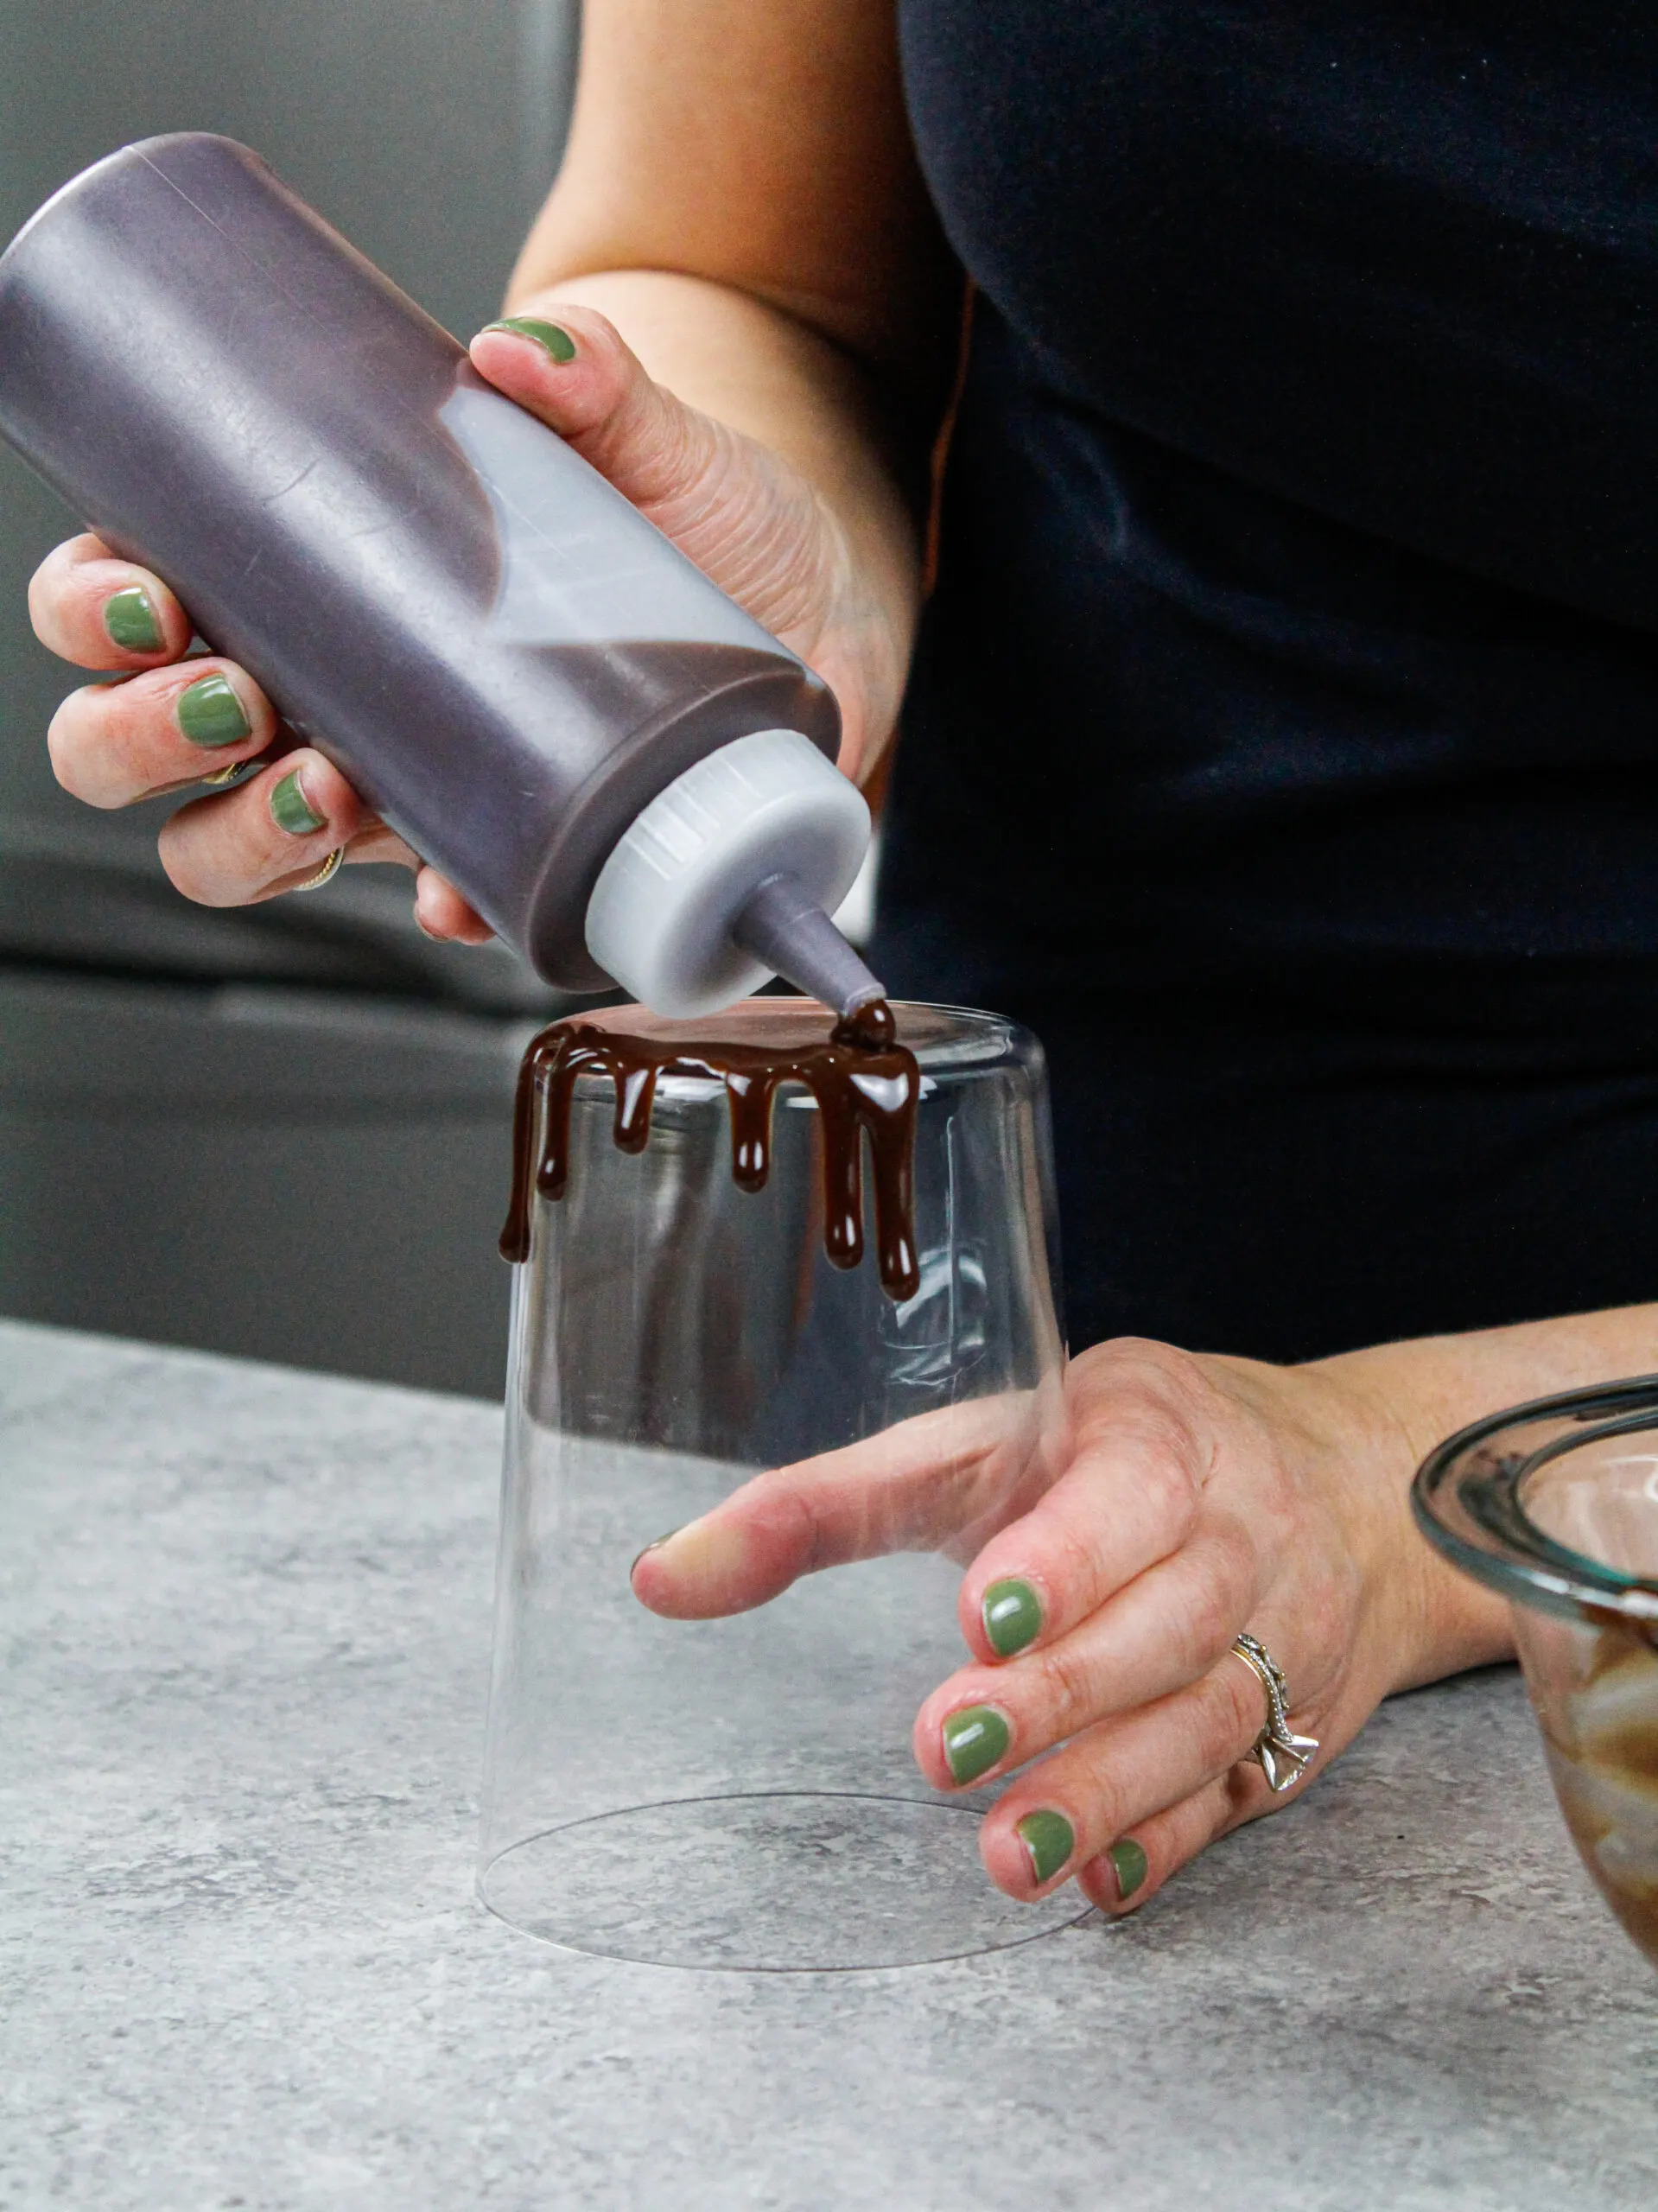 image of chocolate ganache drips being added around a tall glass to test its consistency and practice adding drips to a cake